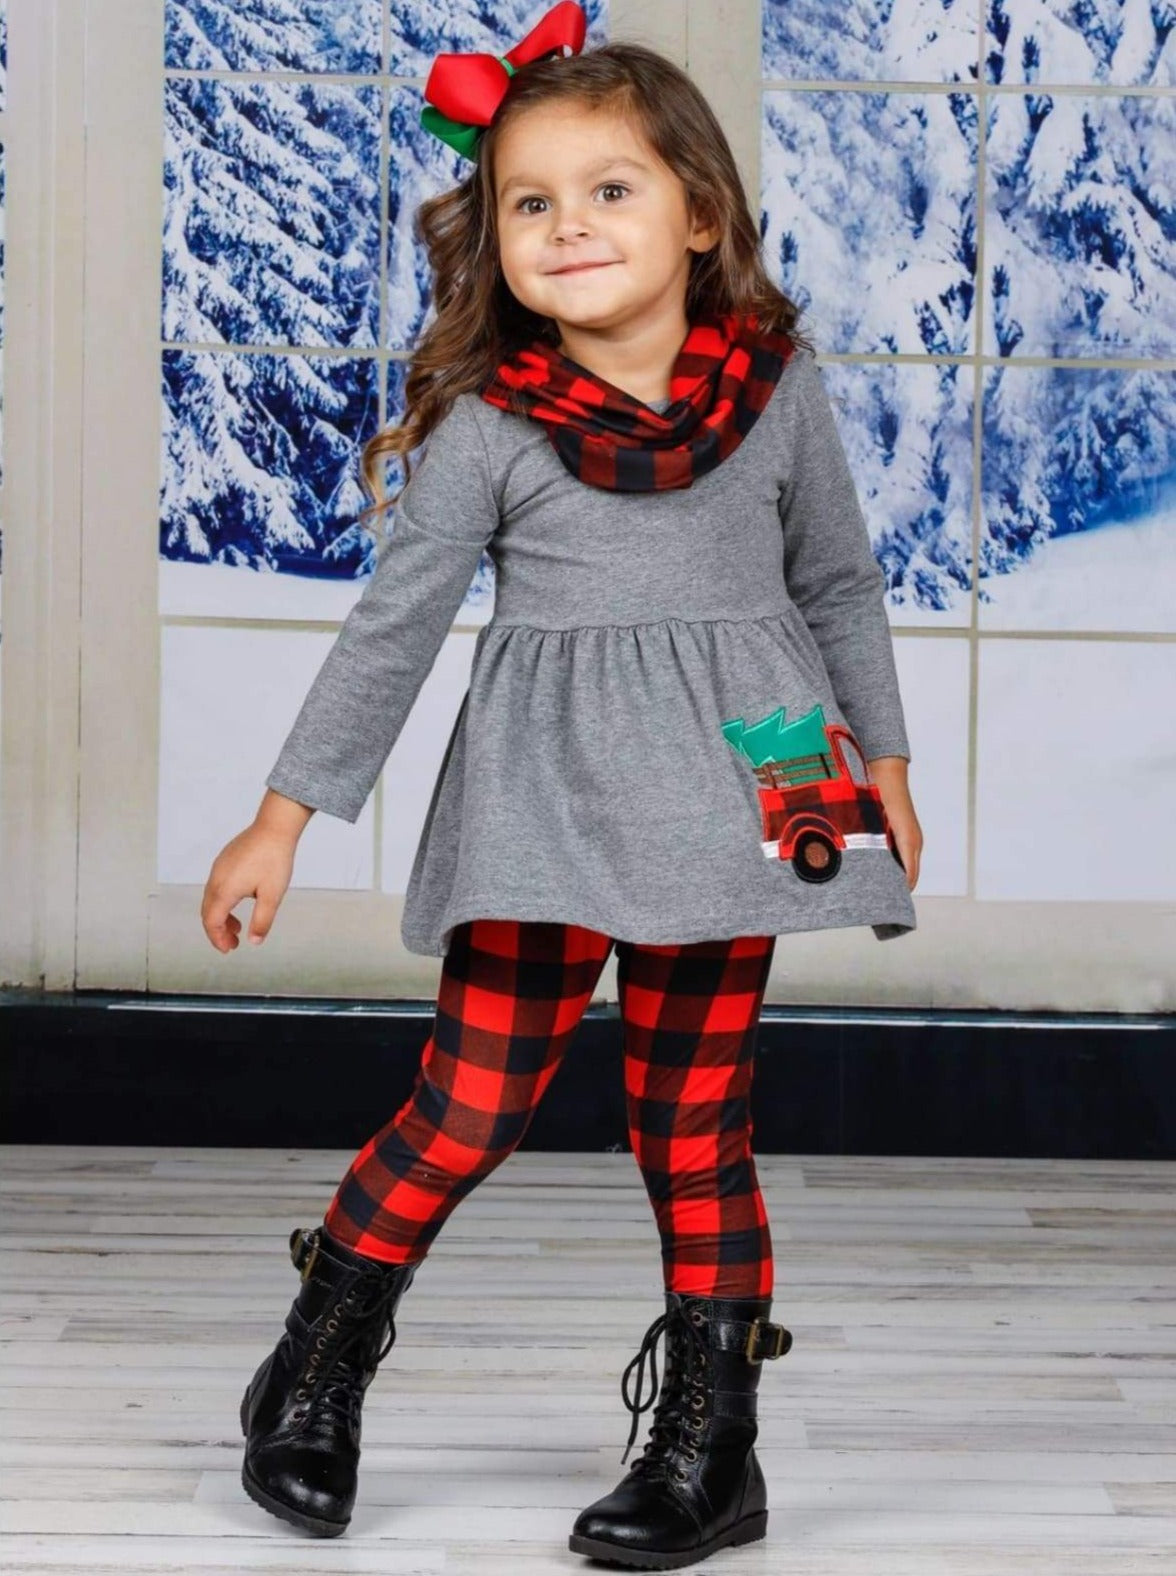 https://cdn.shopify.com/s/files/1/0996/1812/products/girls-christmas-tree-truck-tunic-paid-leggings-and-scarf-set-20-39-99-40-59-10y12y-2t3t-4t5y-mia-belle-baby_284.jpg